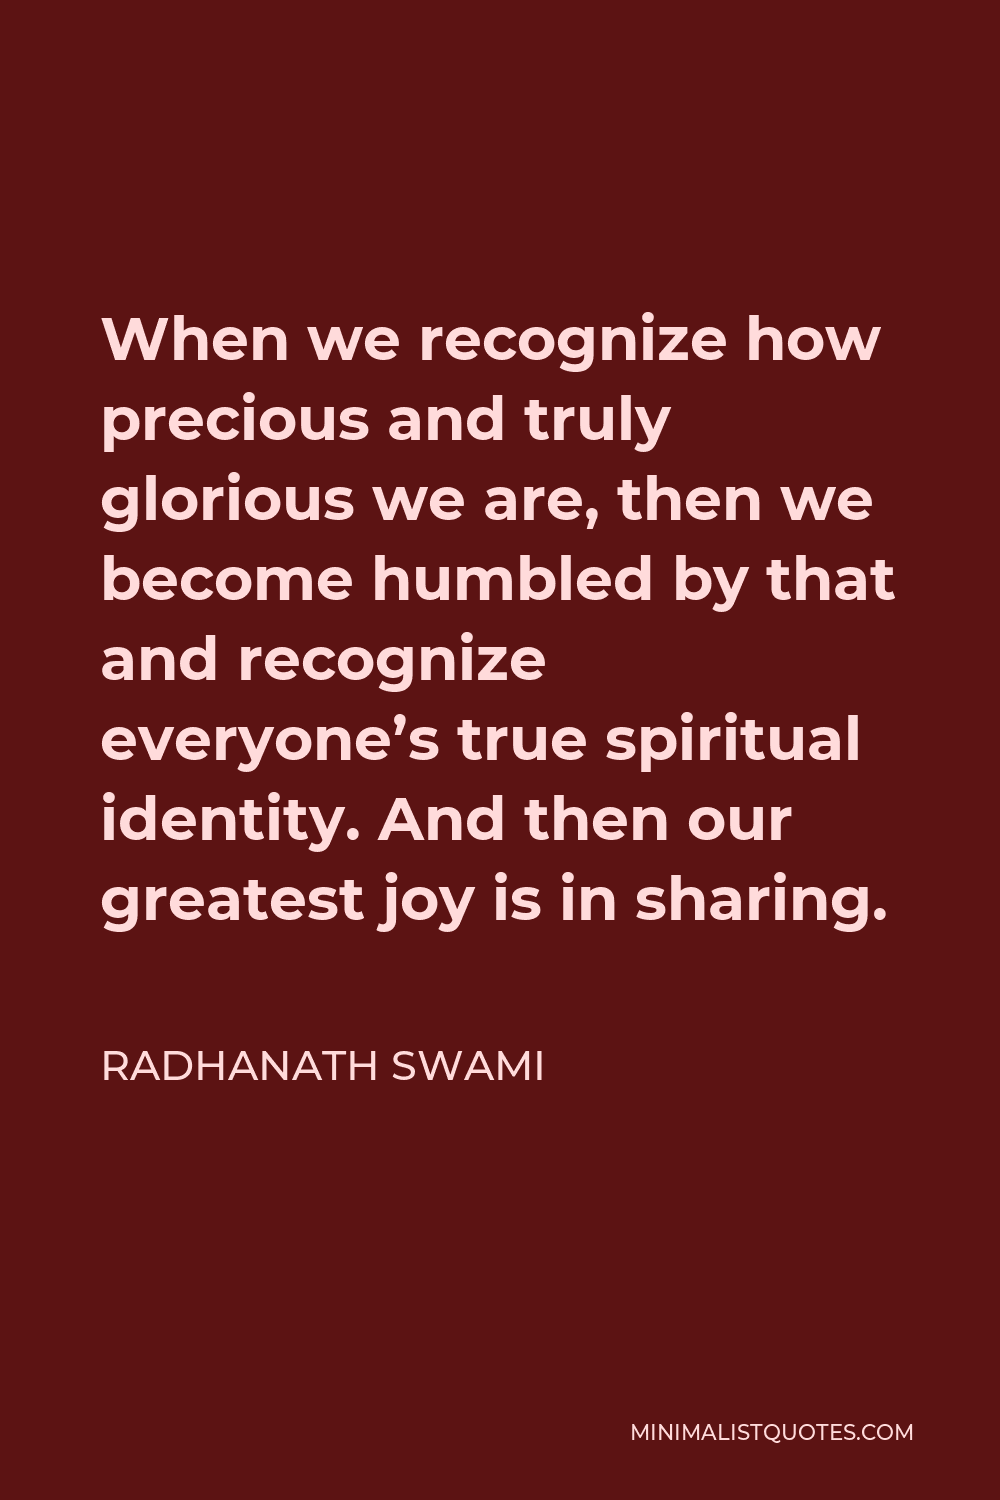 Radhanath Swami Quote - When we recognize how precious and truly glorious we are, then we become humbled by that and recognize everyone’s true spiritual identity. And then our greatest joy is in sharing.